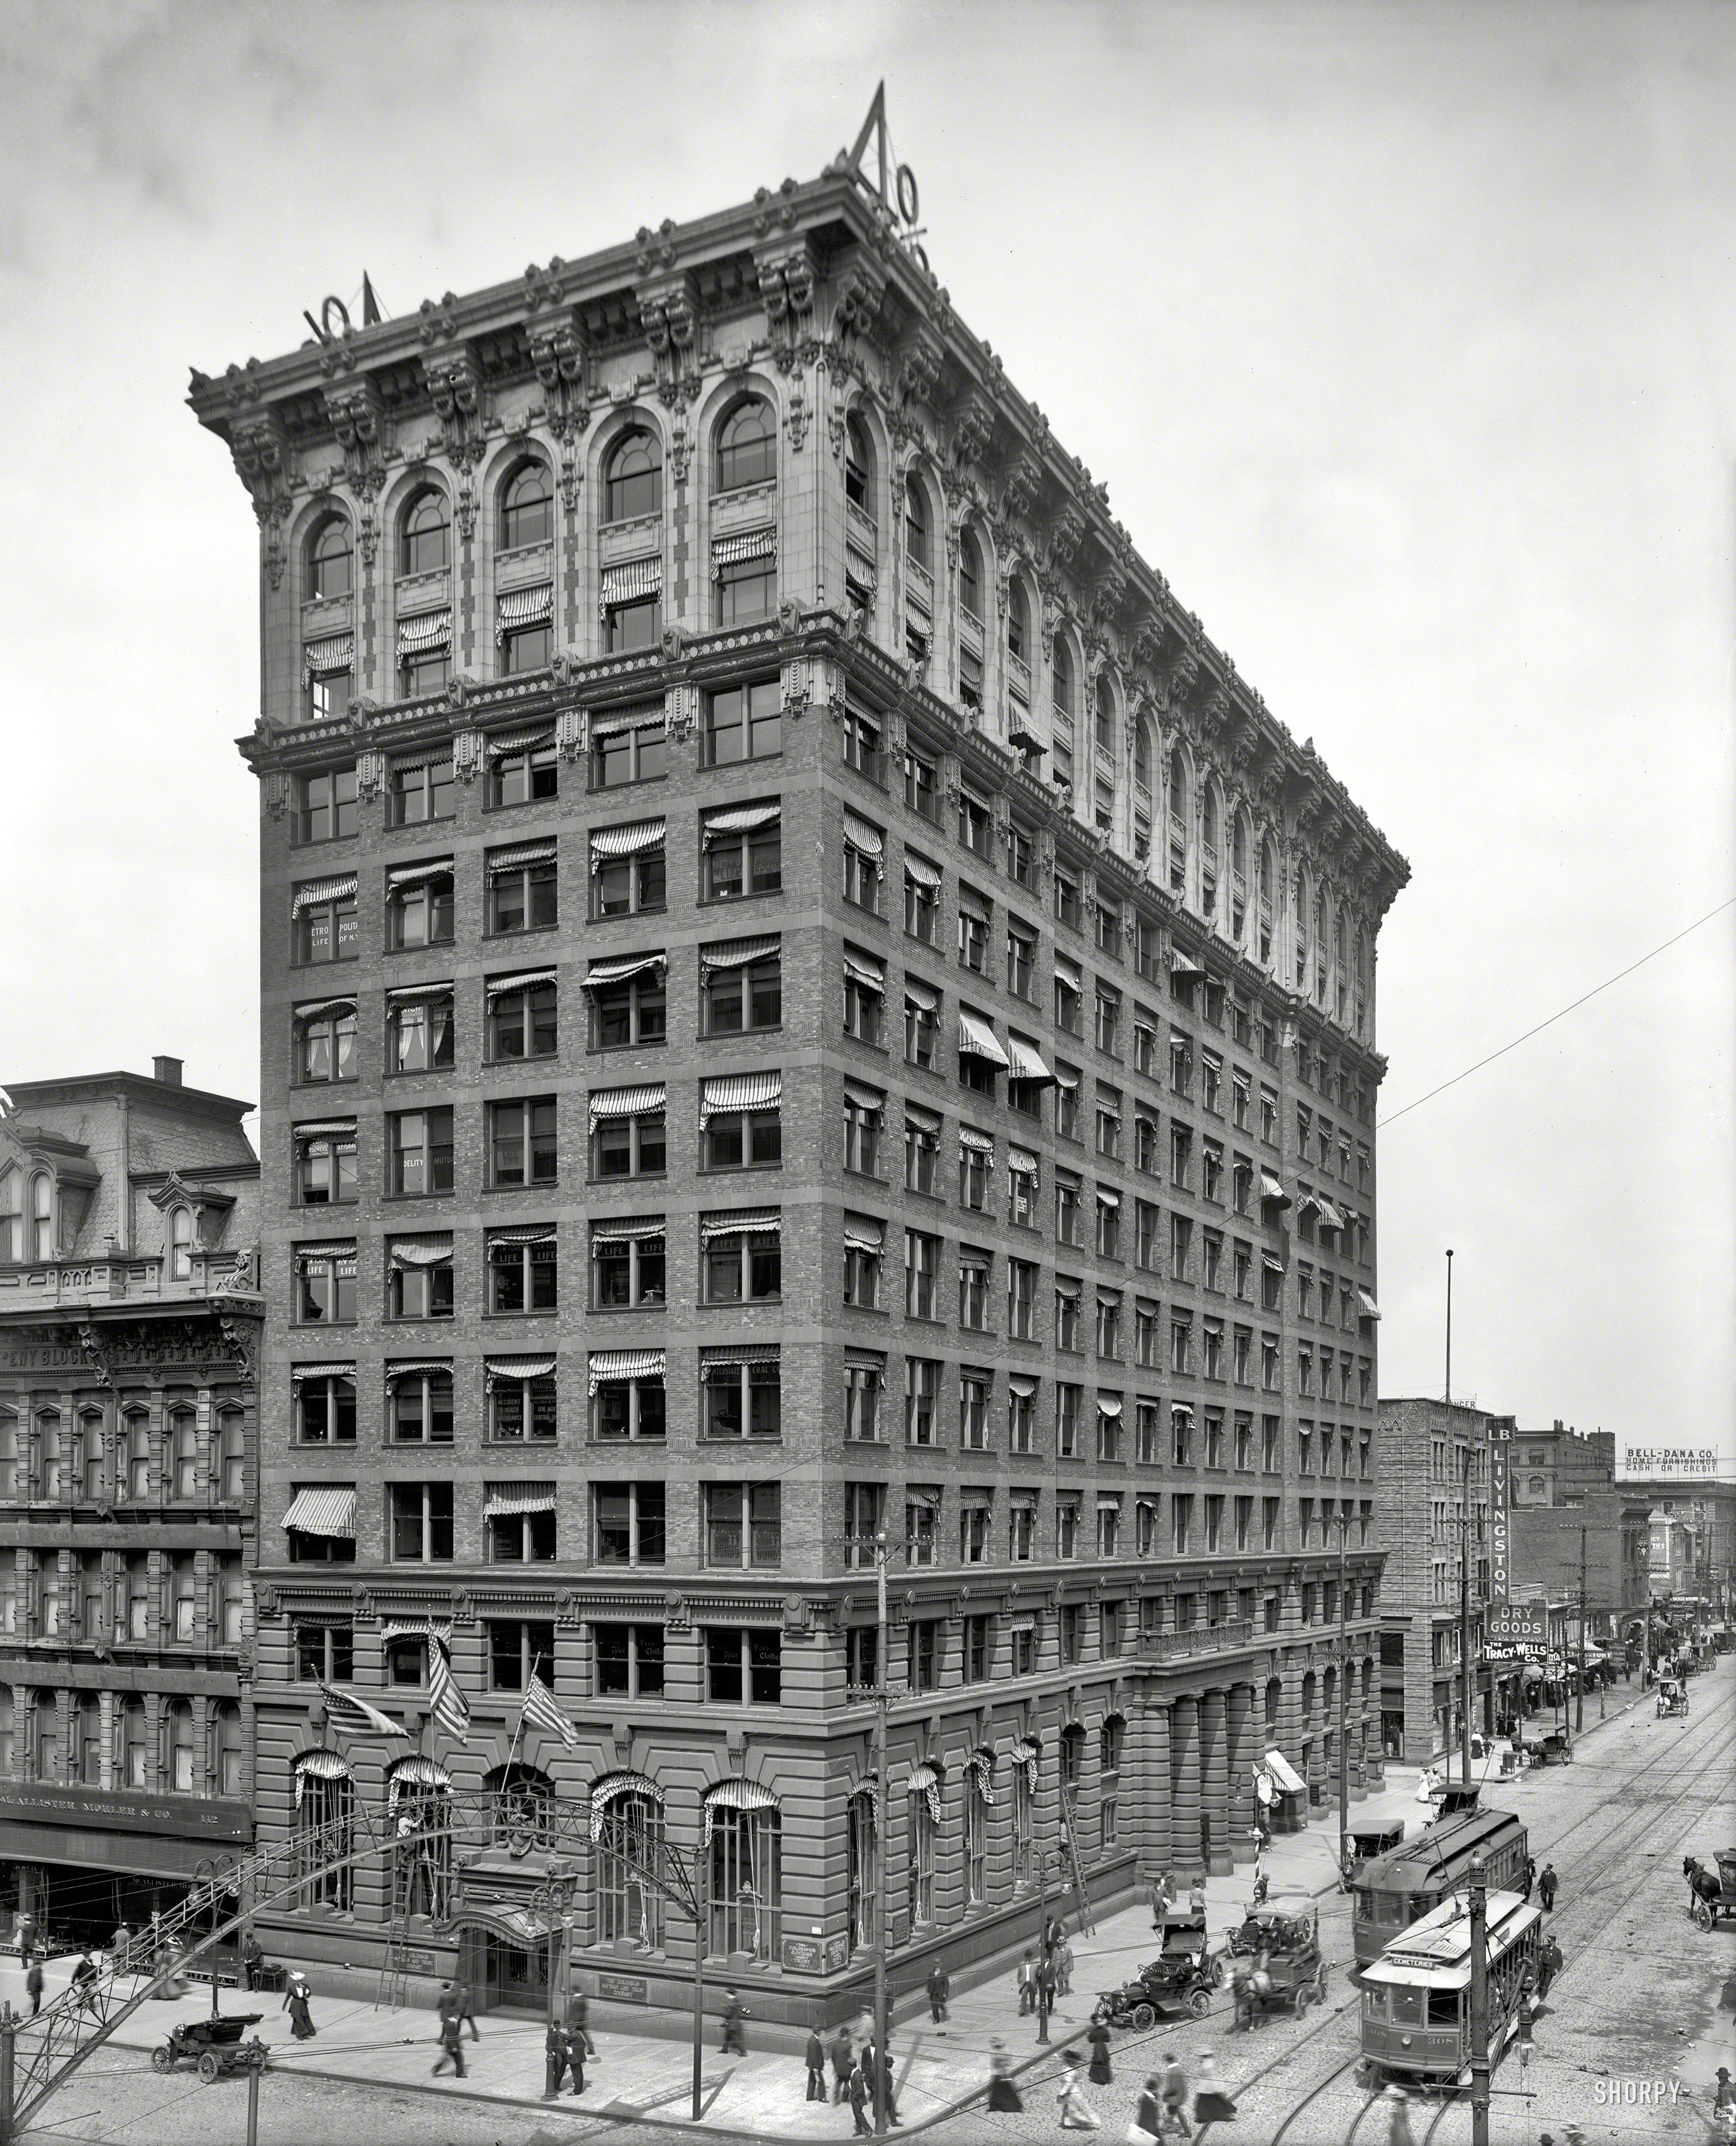 &nbsp; &nbsp; &nbsp; &nbsp; Completed in 1905, the Columbus Savings & Trust Building, known today as the Atlas Building, counted among its amenities "seven elevators, complete refrigerating plant, its own power plant to furnish electric lights for the offices, direct steam heating and a pneumatic clock system with dials on each floor."

Columbus, Ohio, circa 1910. "Columbus Savings & Trust Company." 8x10 inch dry plate glass negative, Detroit Publishing Company. View full size.